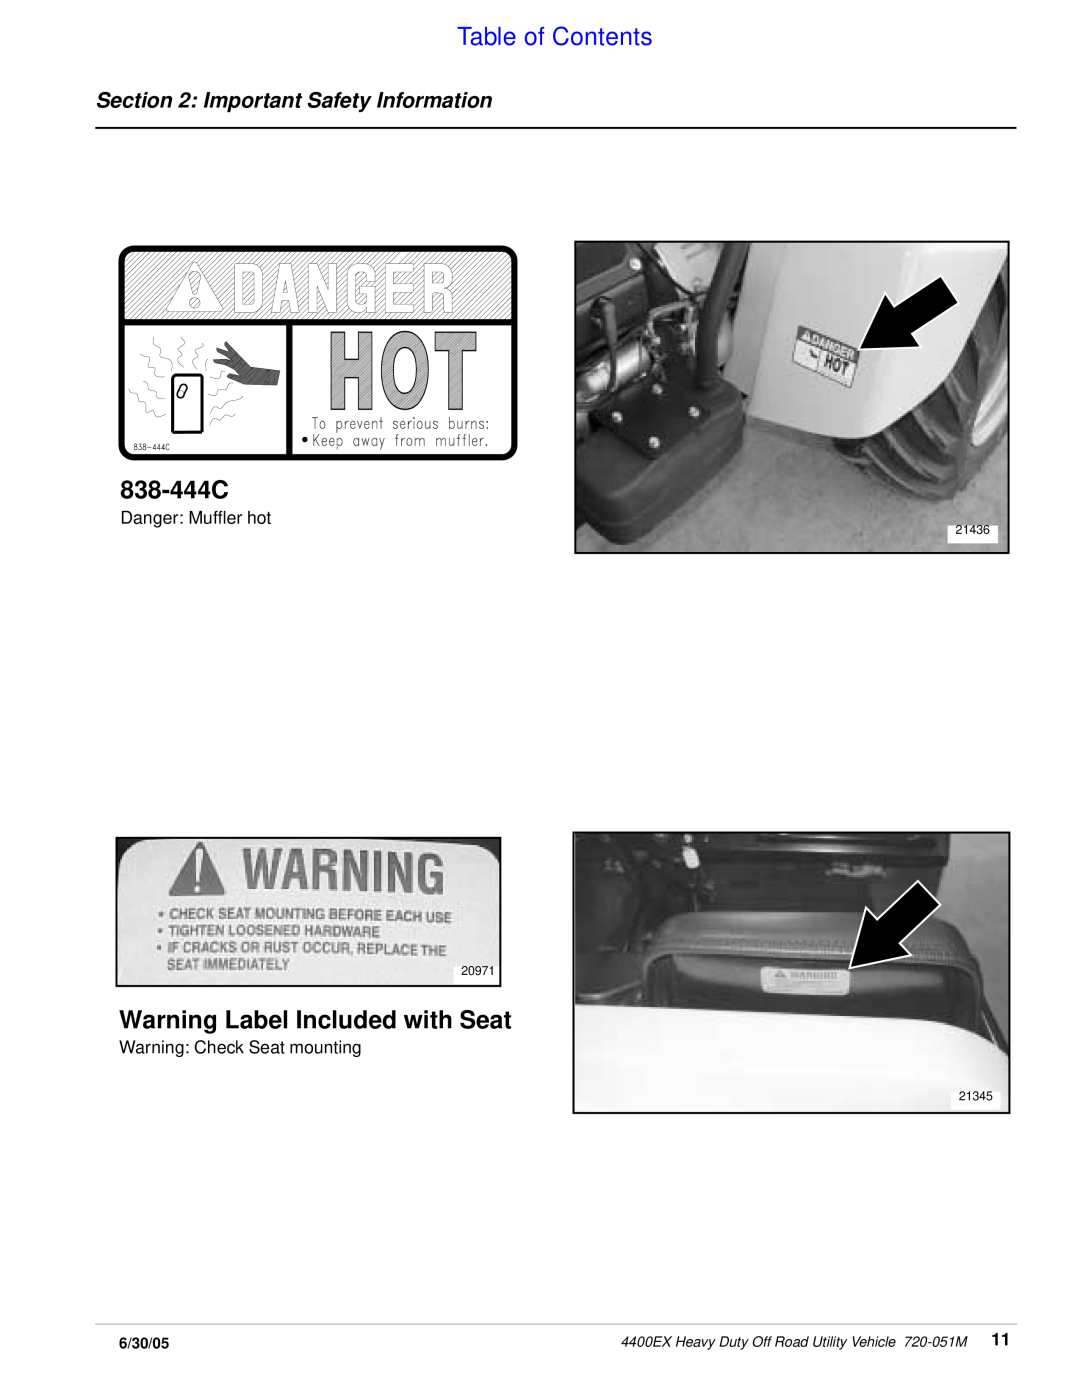 Land Pride 4400ex Warning Label Included with Seat, 838-444C, Table of Contents, Important Safety Information, 6/30/05 